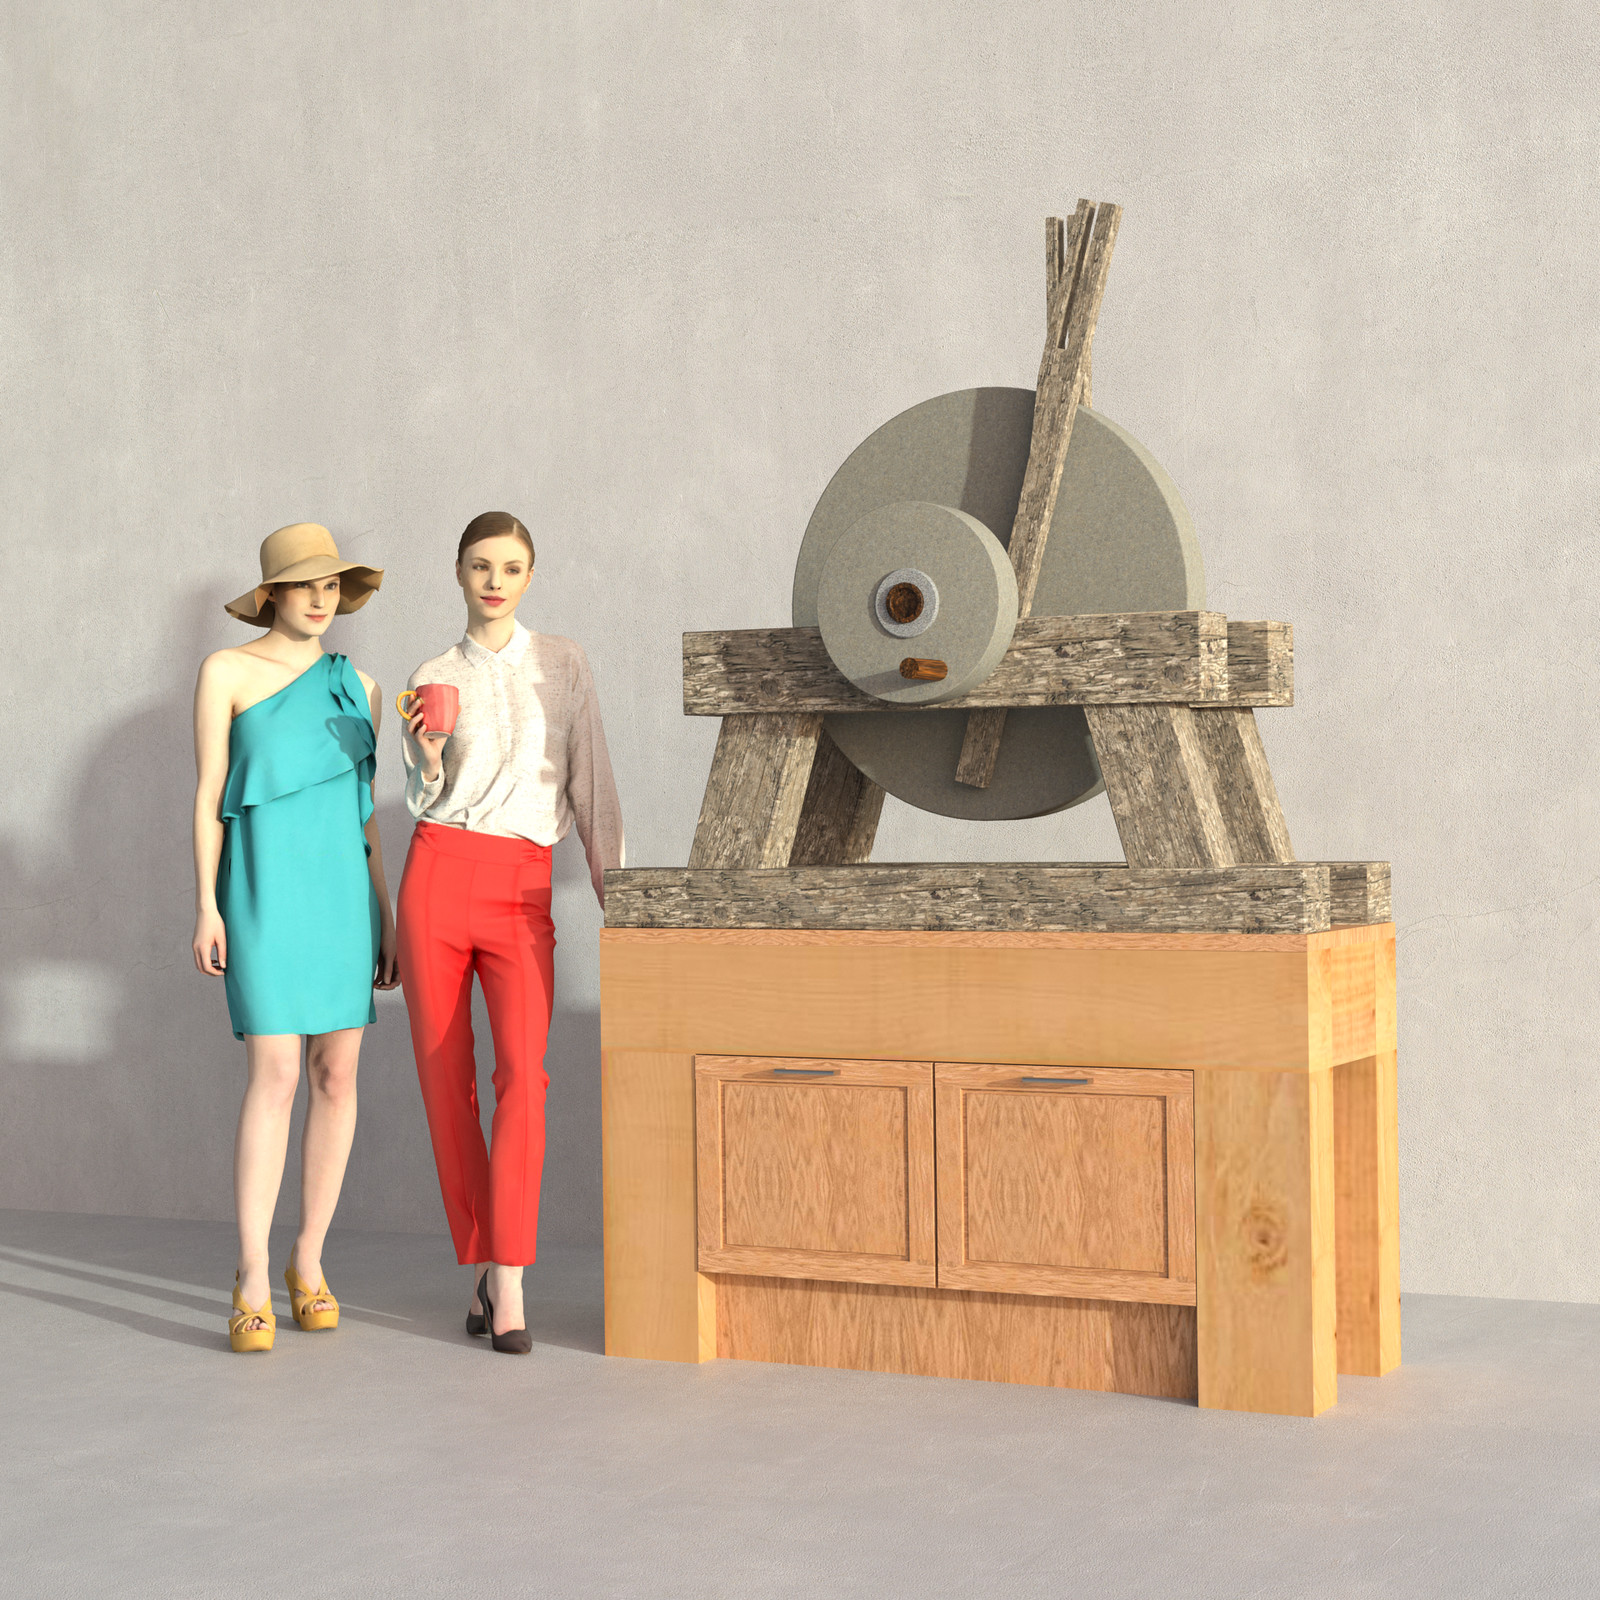 SketchUp + Thea Render 
Rivendell Mill's Millstone 03

The 3d people are from AXYZ design collections found here:
Collection 30 : http://bit.ly/2kS8pHx
Collection 31 : http://bit.ly/2lJSkFu